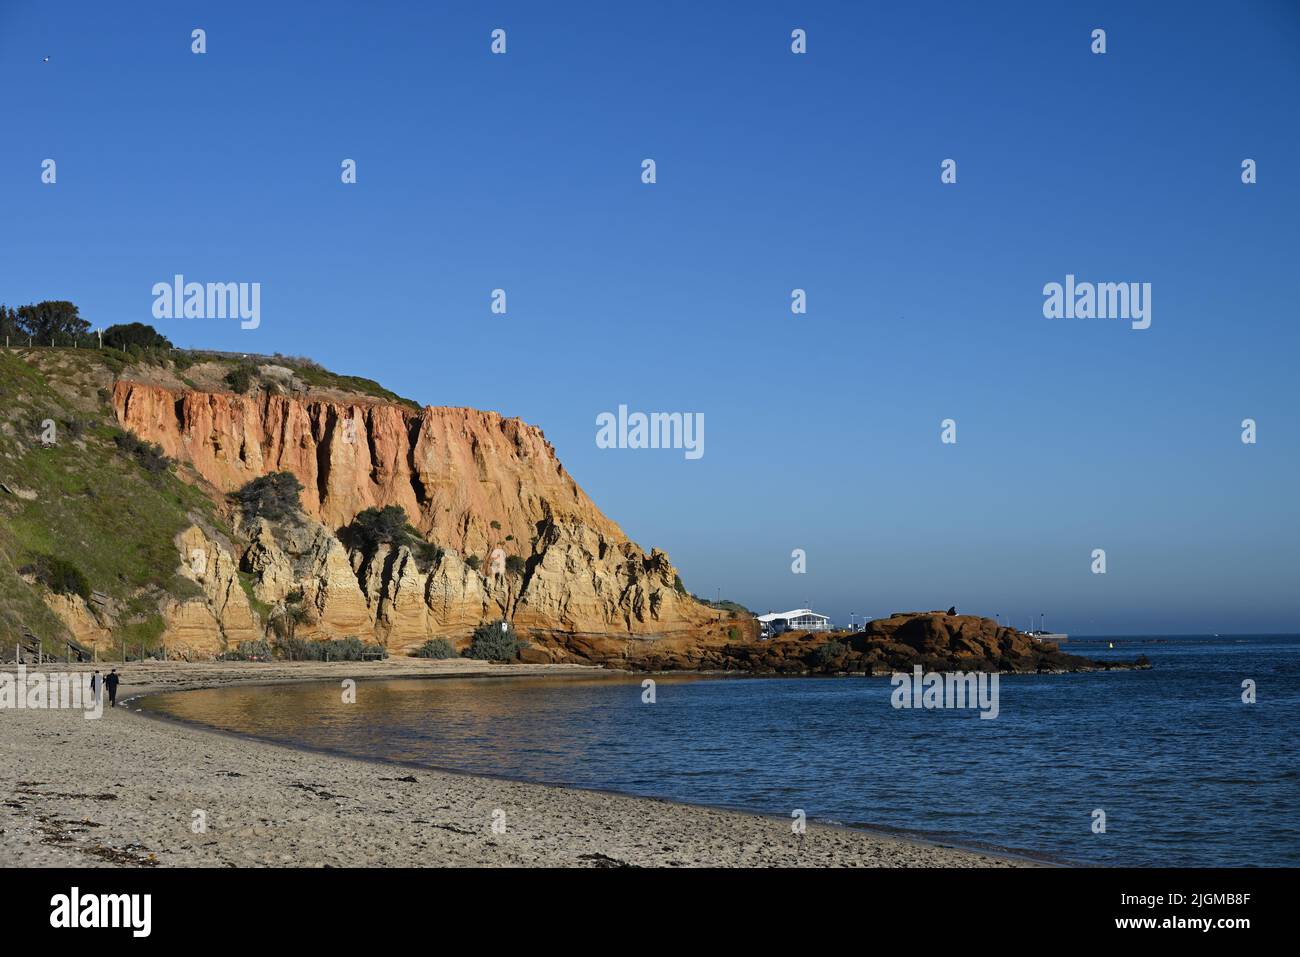 Northern view of the sandstone cliffs known as Red Bluff, with obscured pier in the background Stock Photo